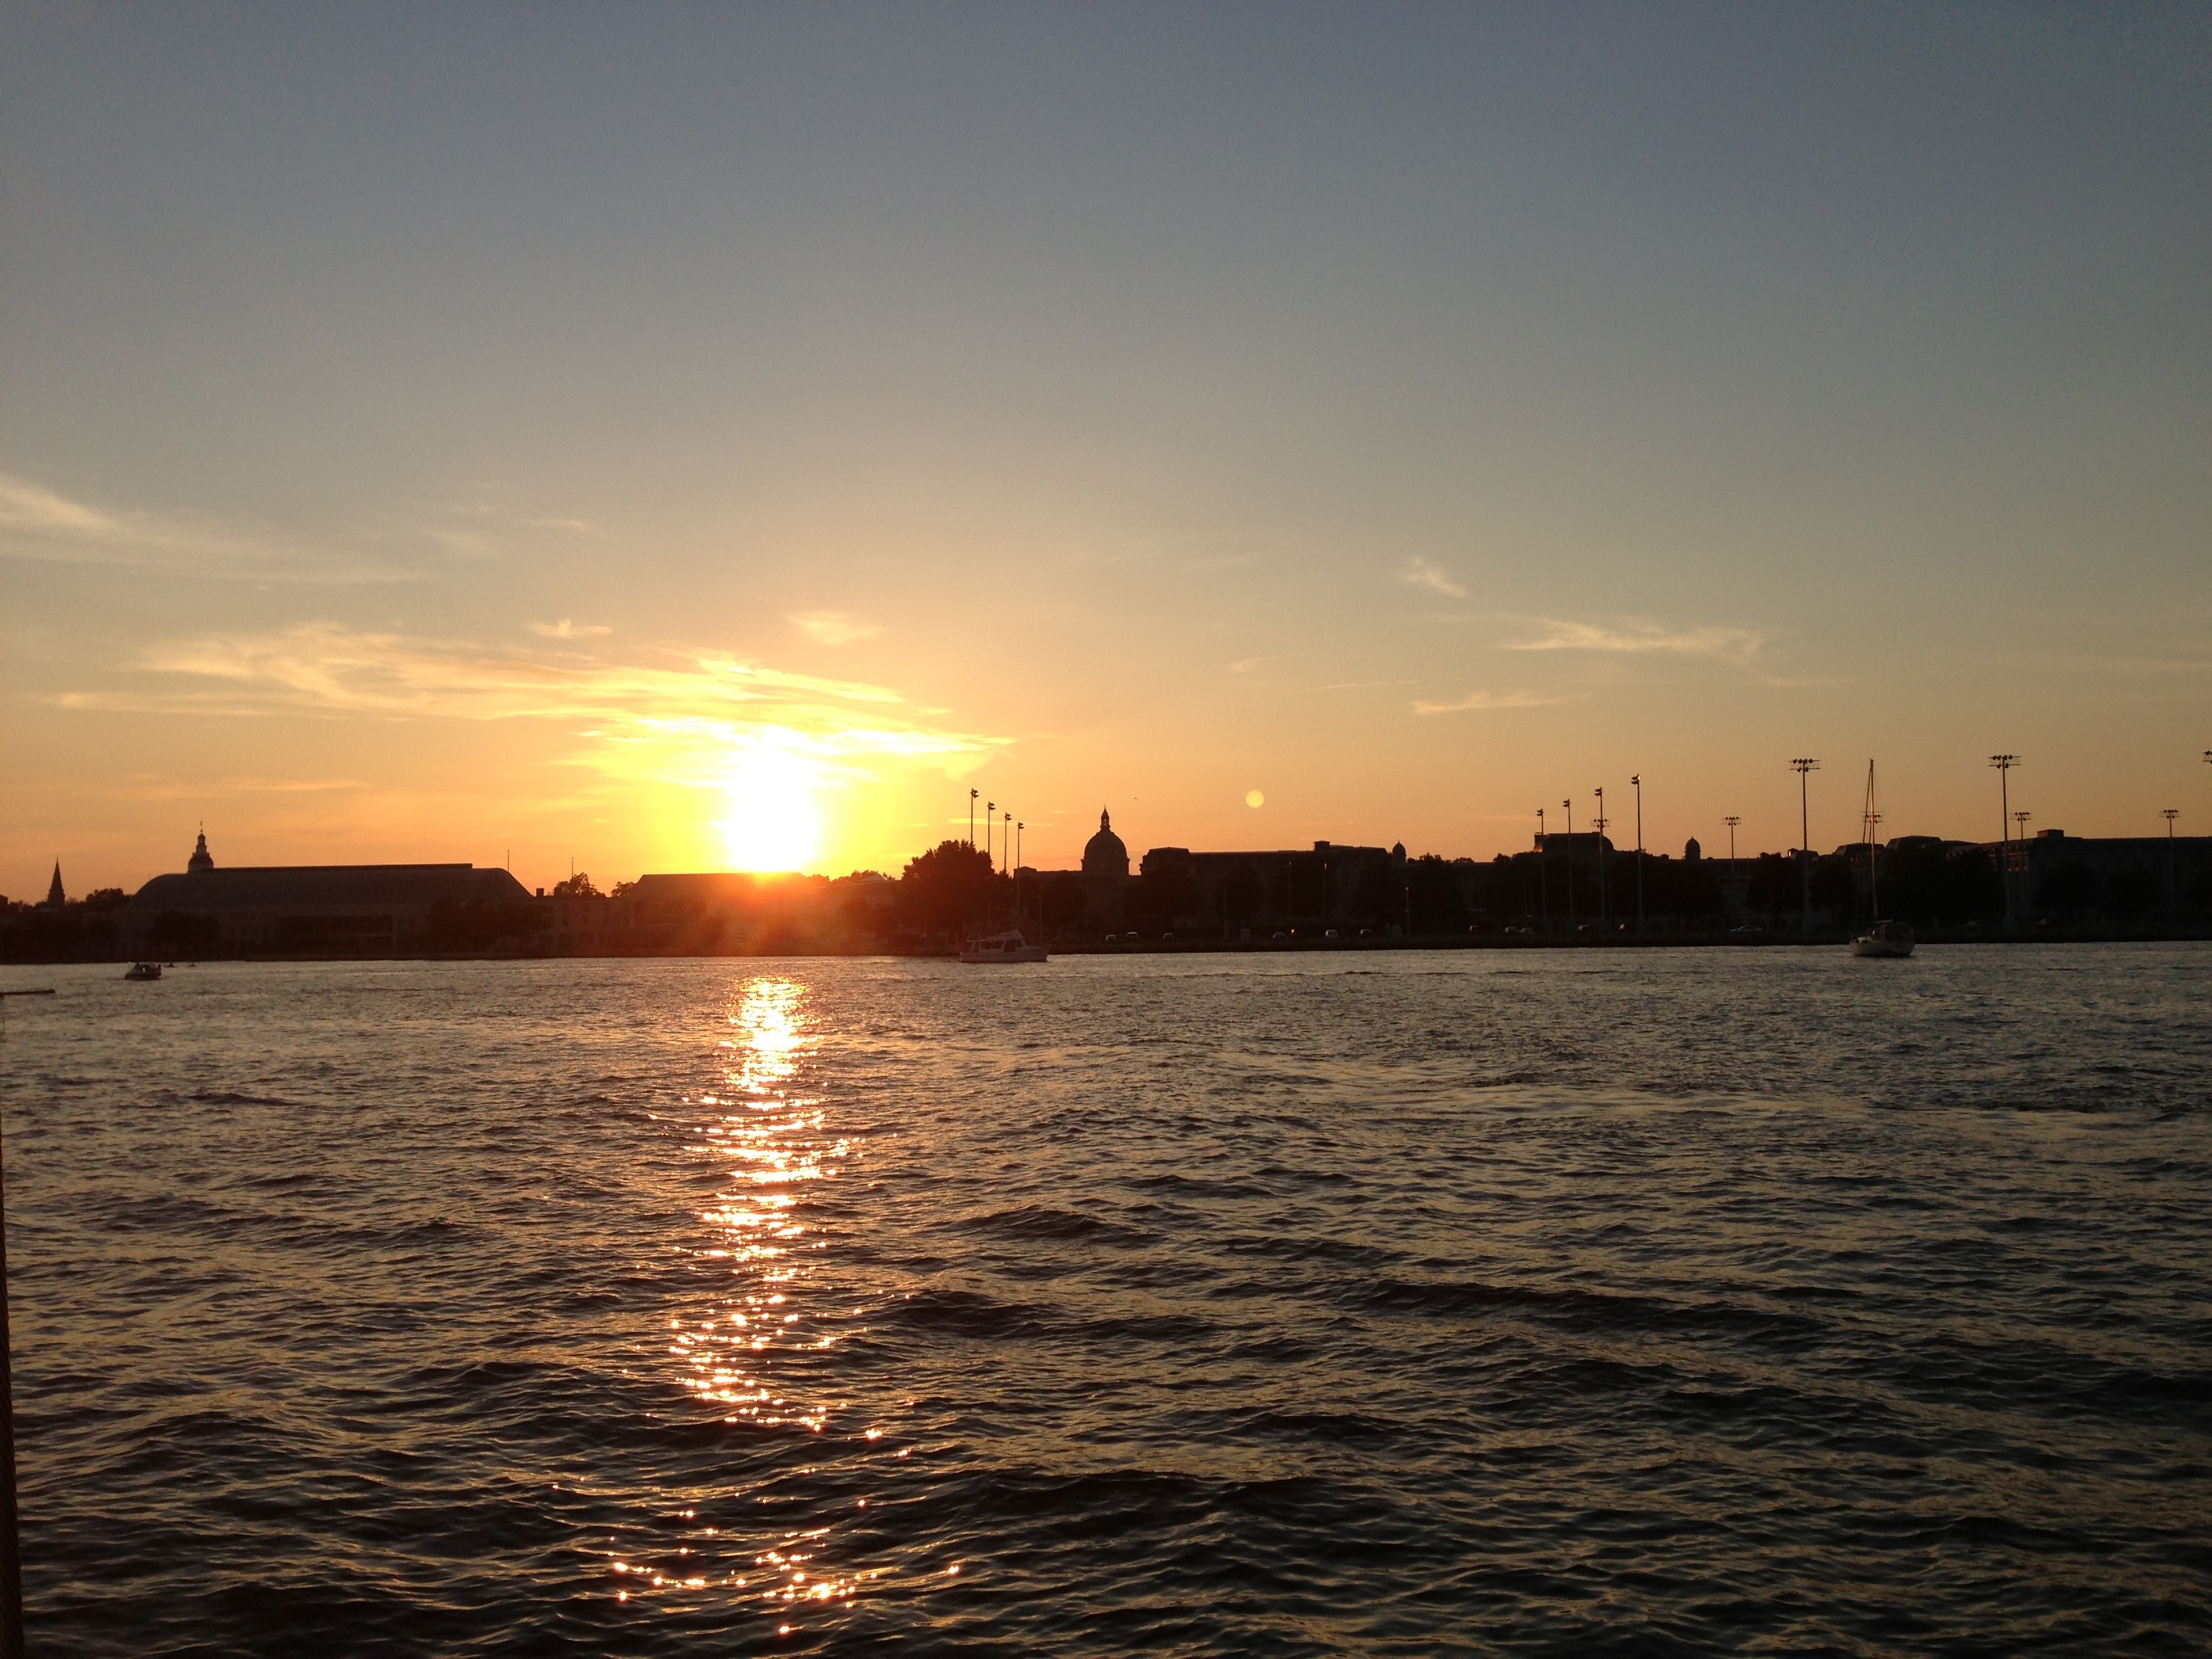 Sunset over the USNA Academy taken from the water